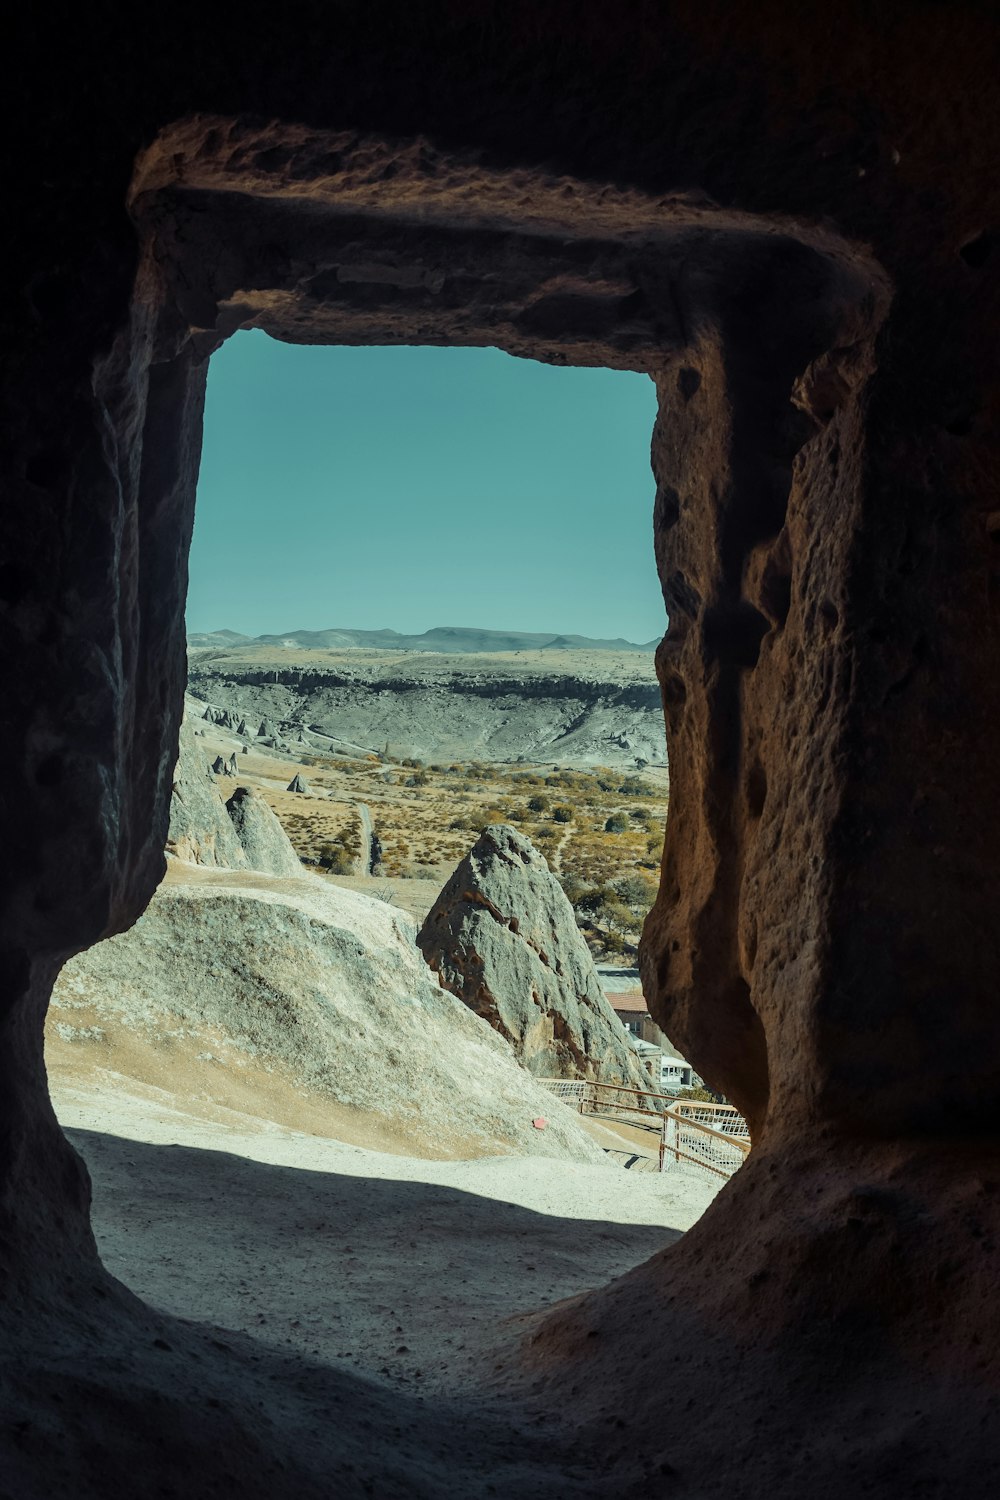 a view from inside a cave looking out into the desert